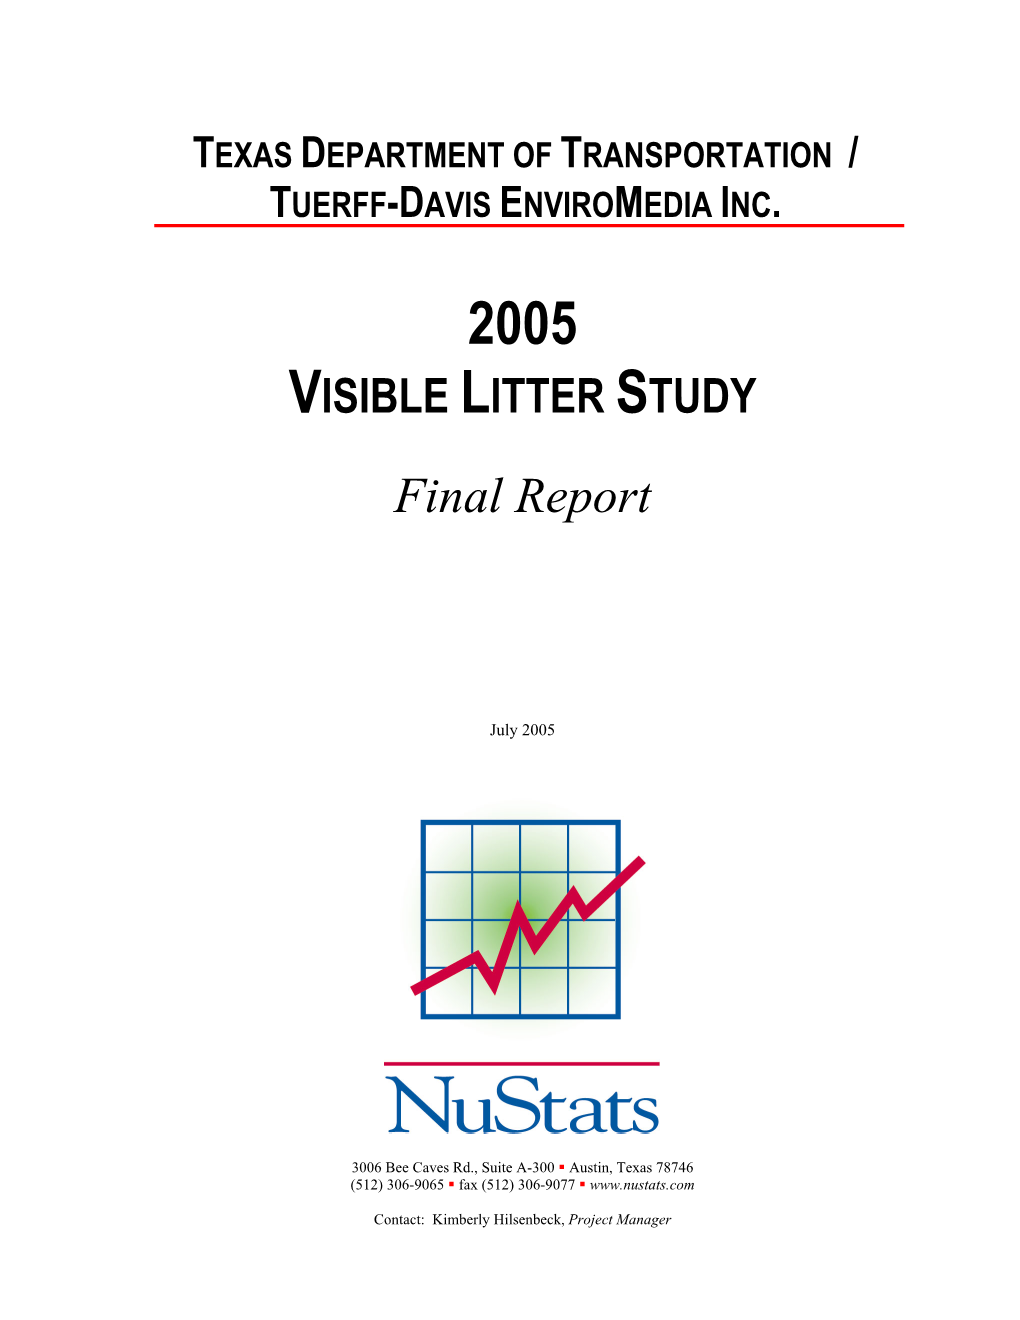 View 2005 Visible Litter Study Results